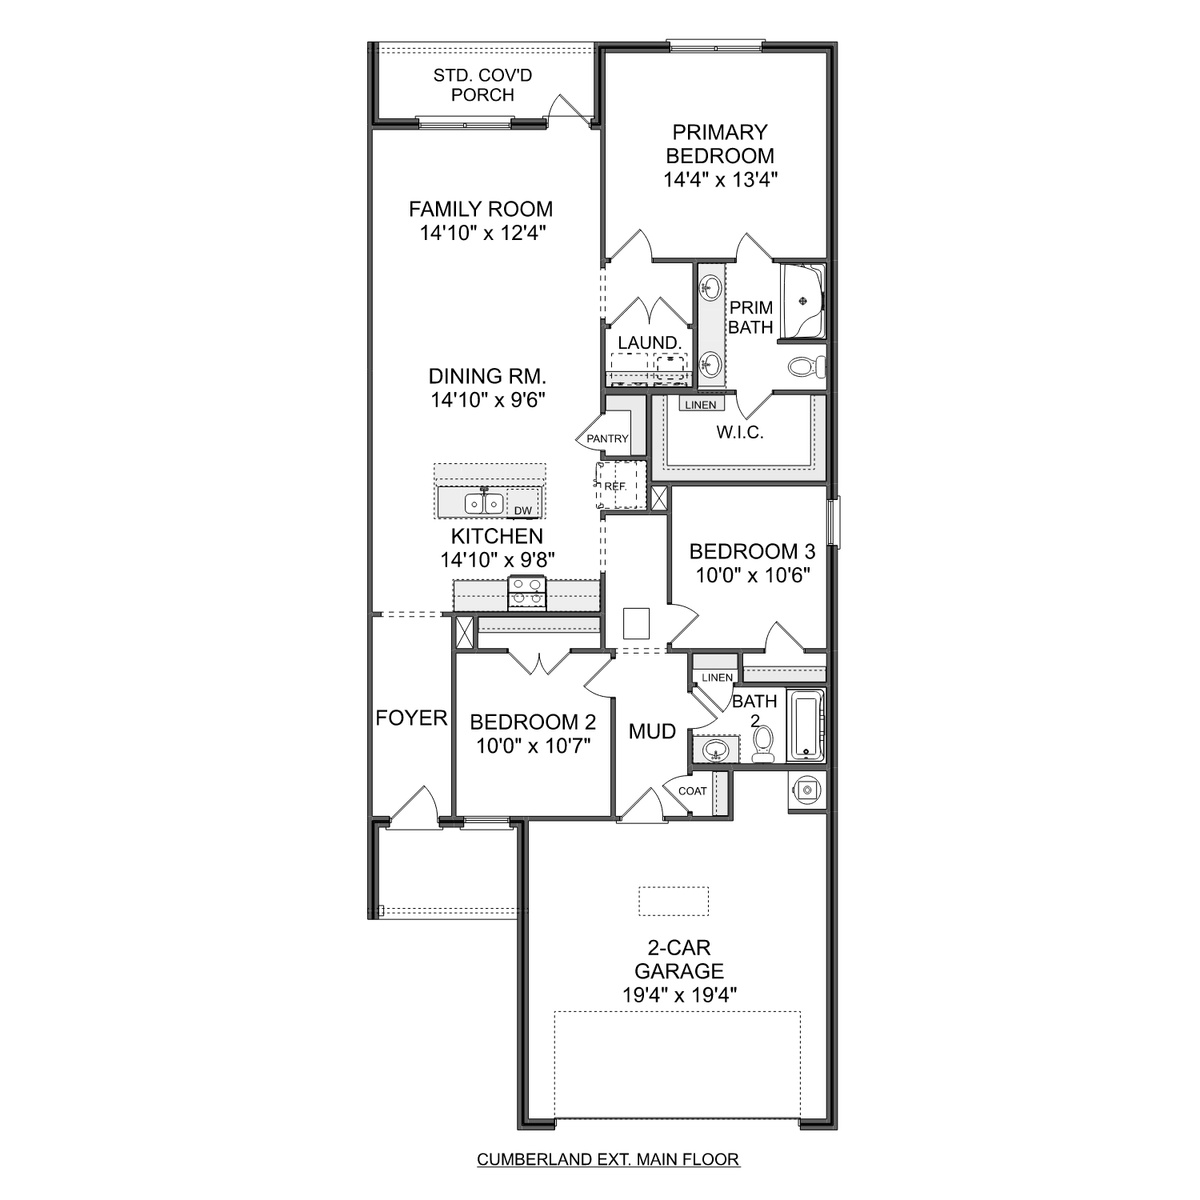 1 - The Cumberland B floor plan layout for 3145 Lea Lane in Davidson Homes' Hollon Meadow community.